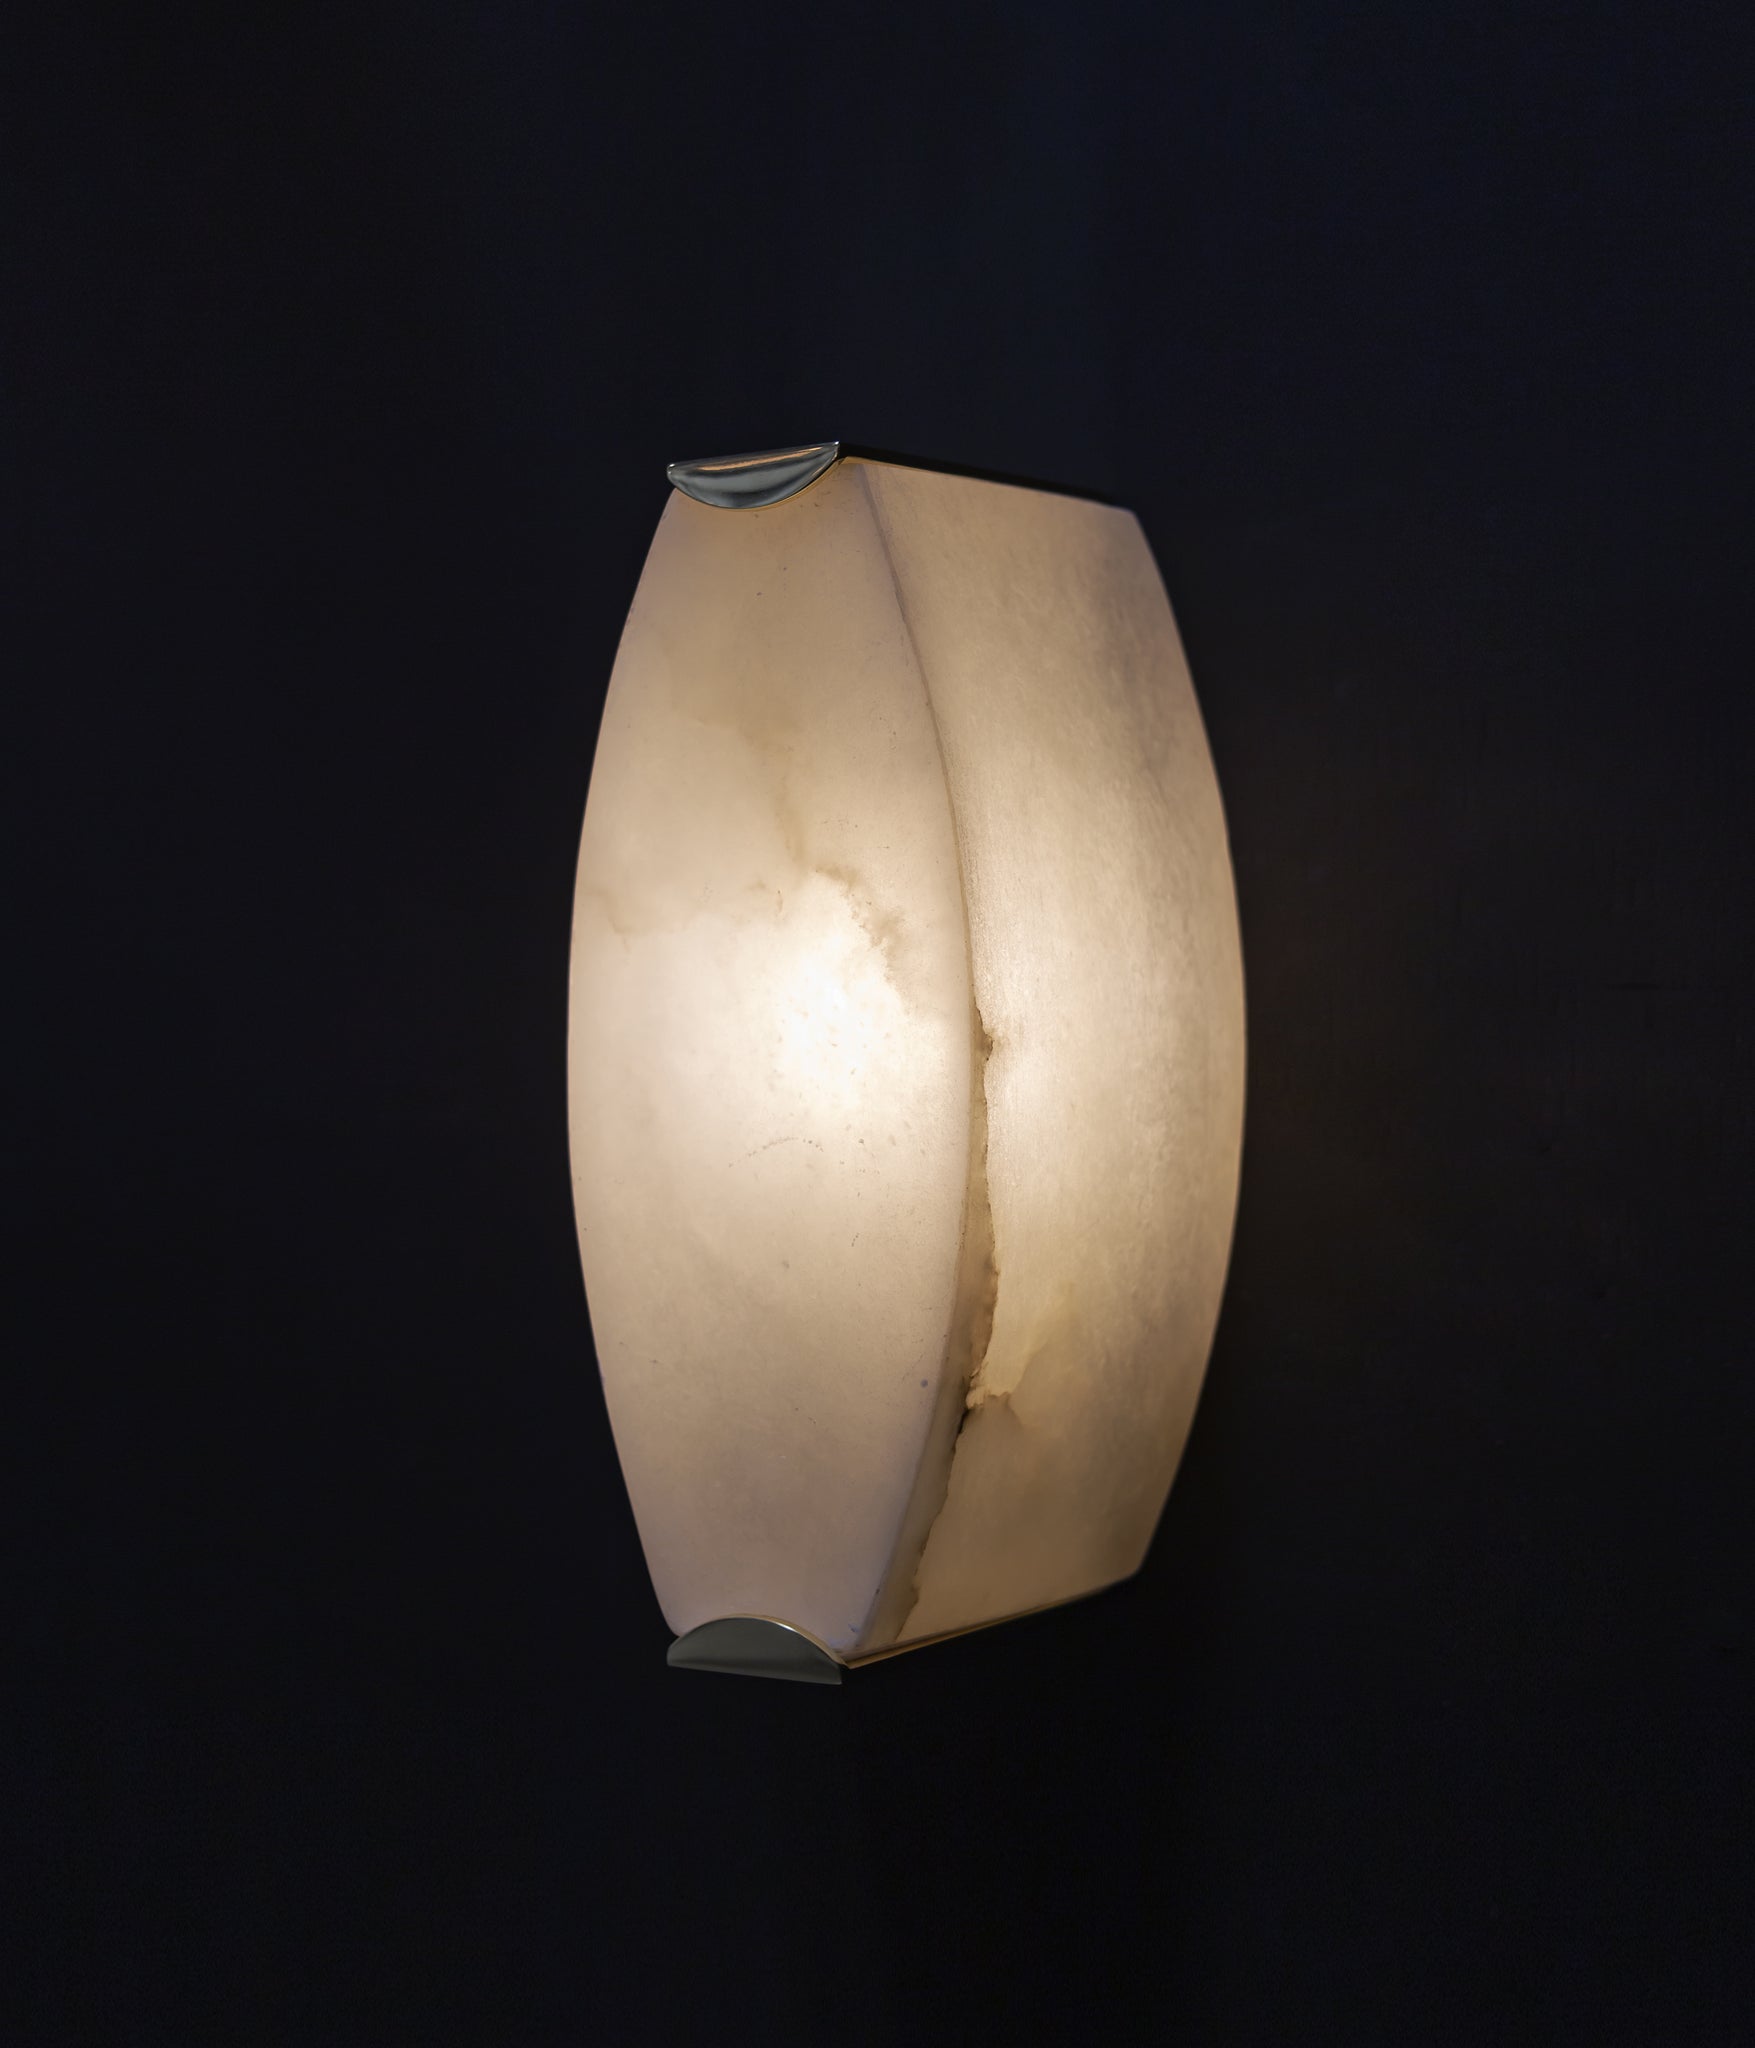 RAVEL Wall Sconce